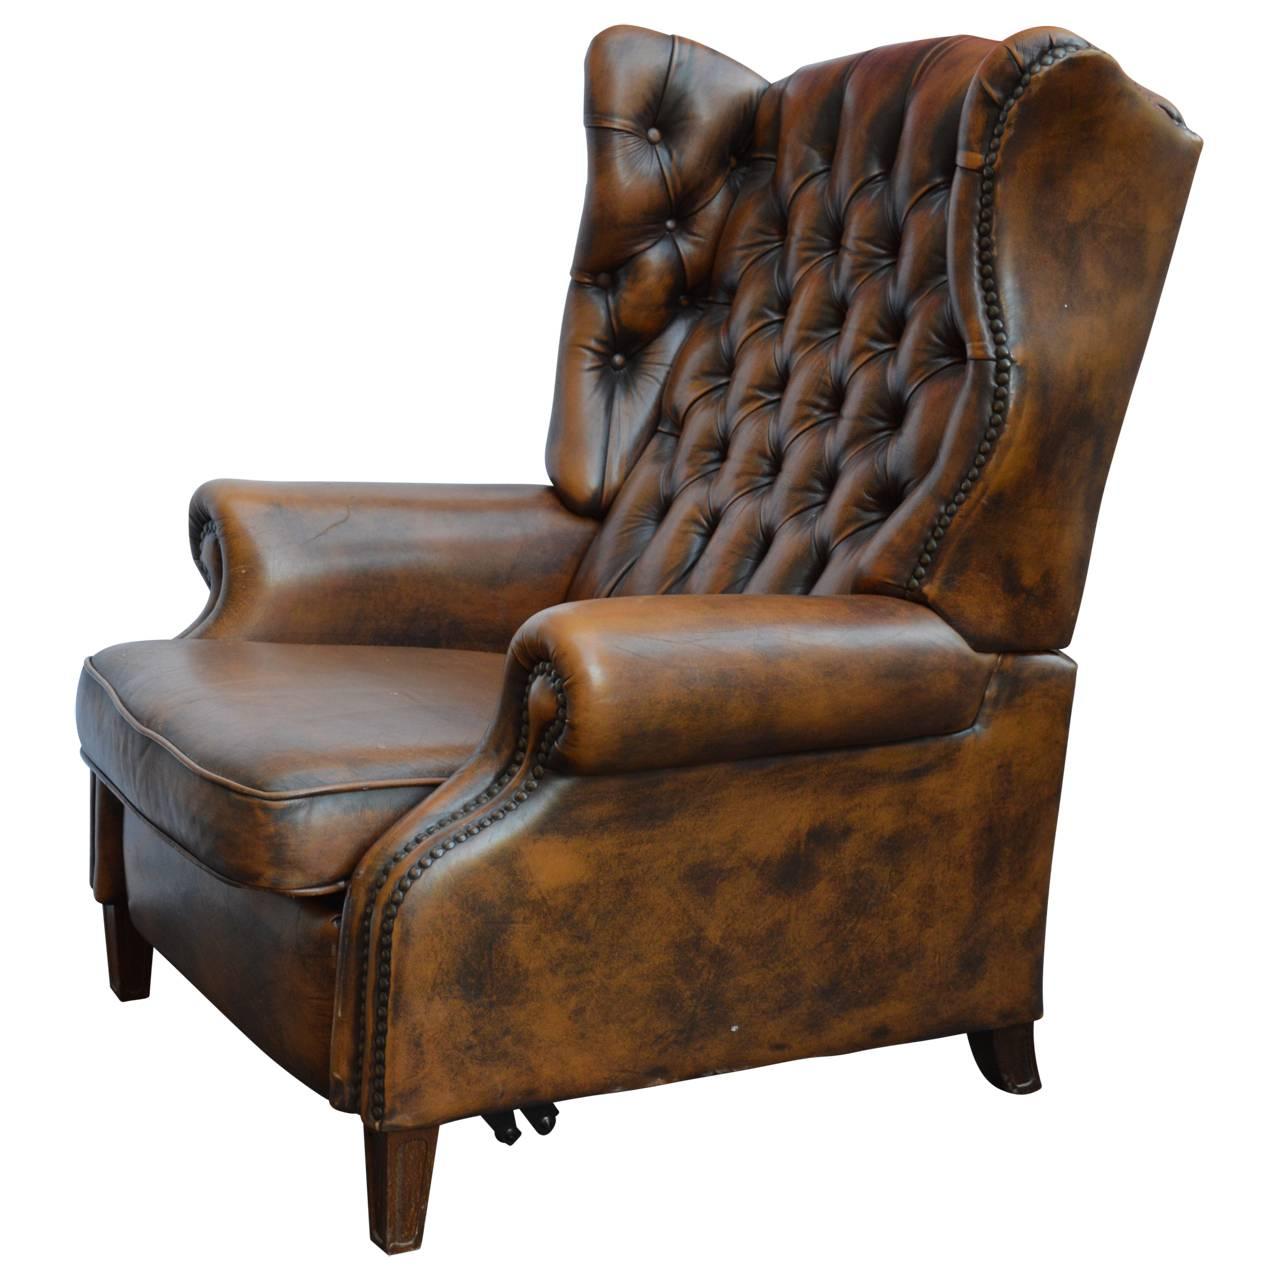 Large Chesterfield armchair with internal footstool.